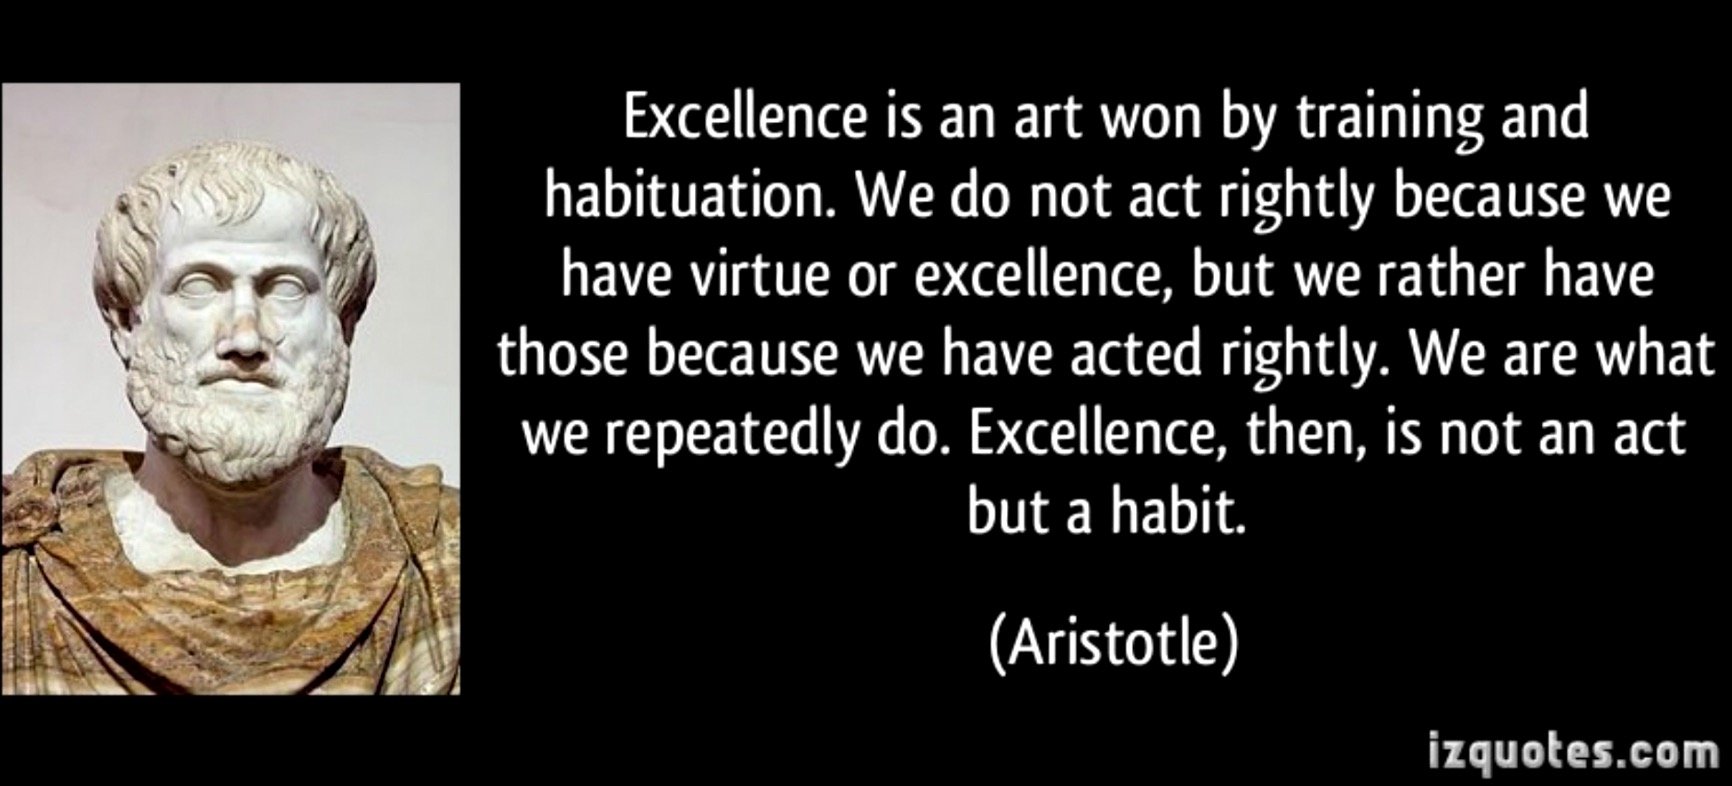 PewDiePie was inspired by Aristotle’s idea that true virtue is a result of ...